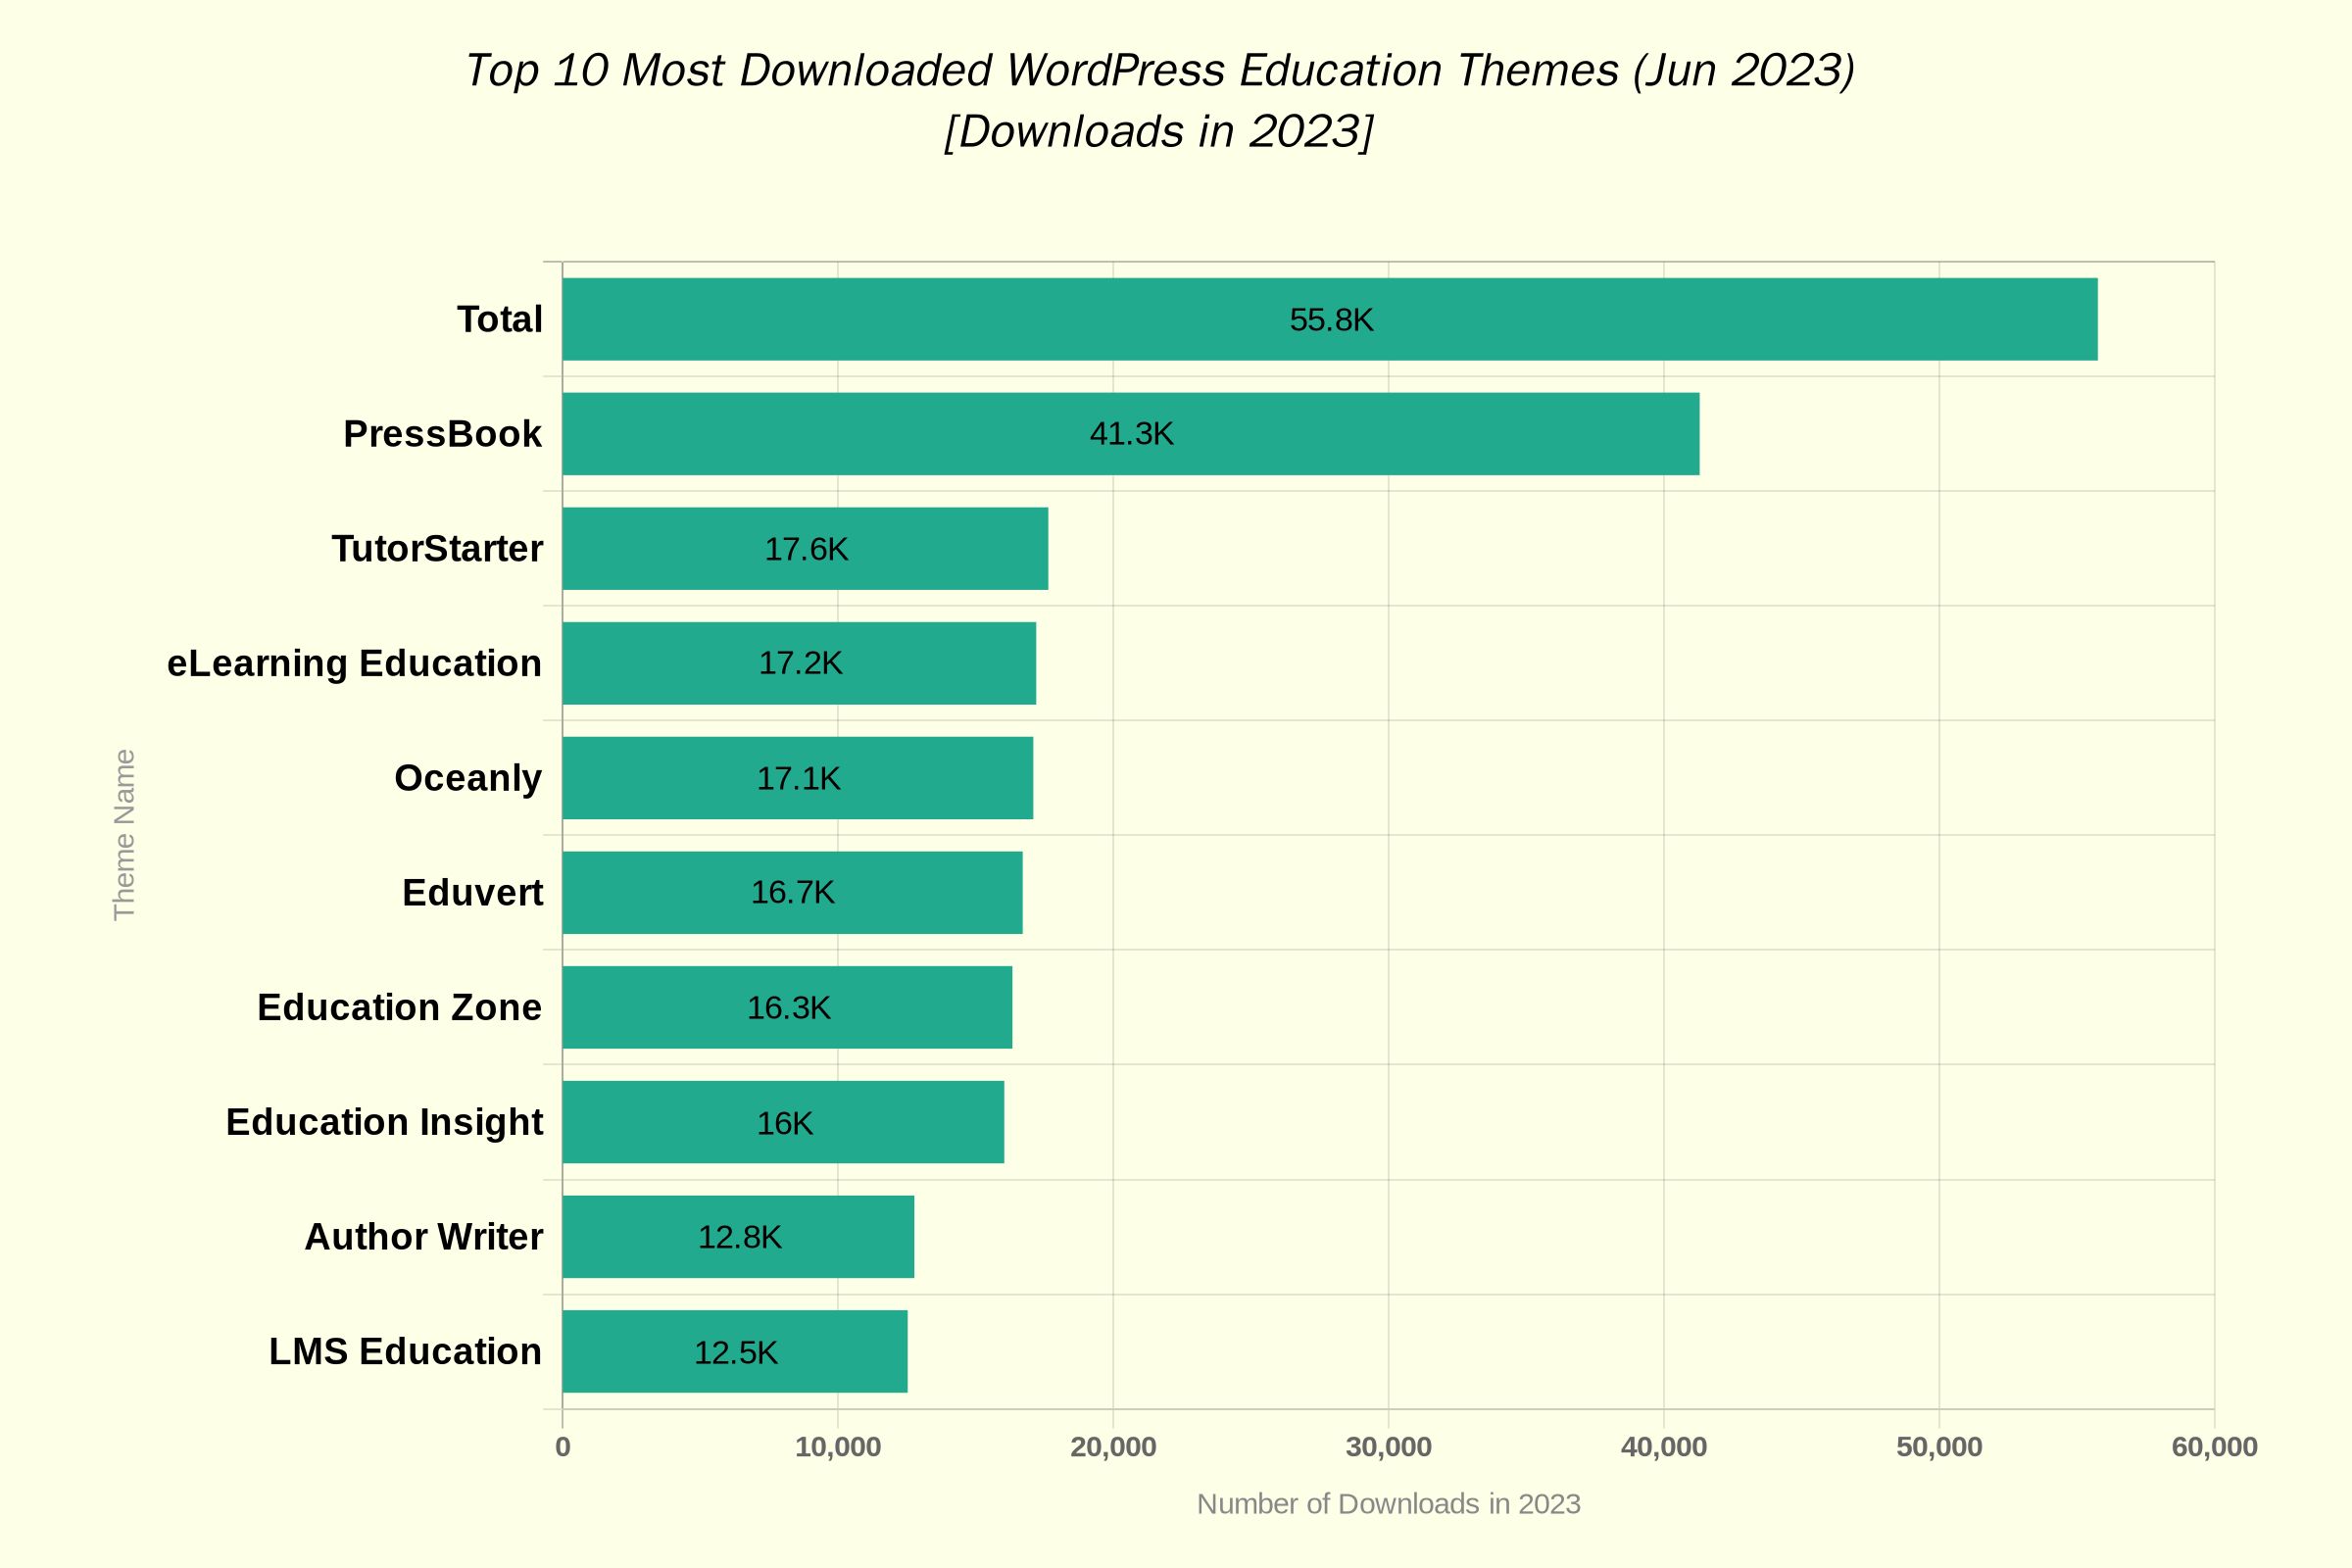 Top 10 most downloaded free WordPress education themes in 2023